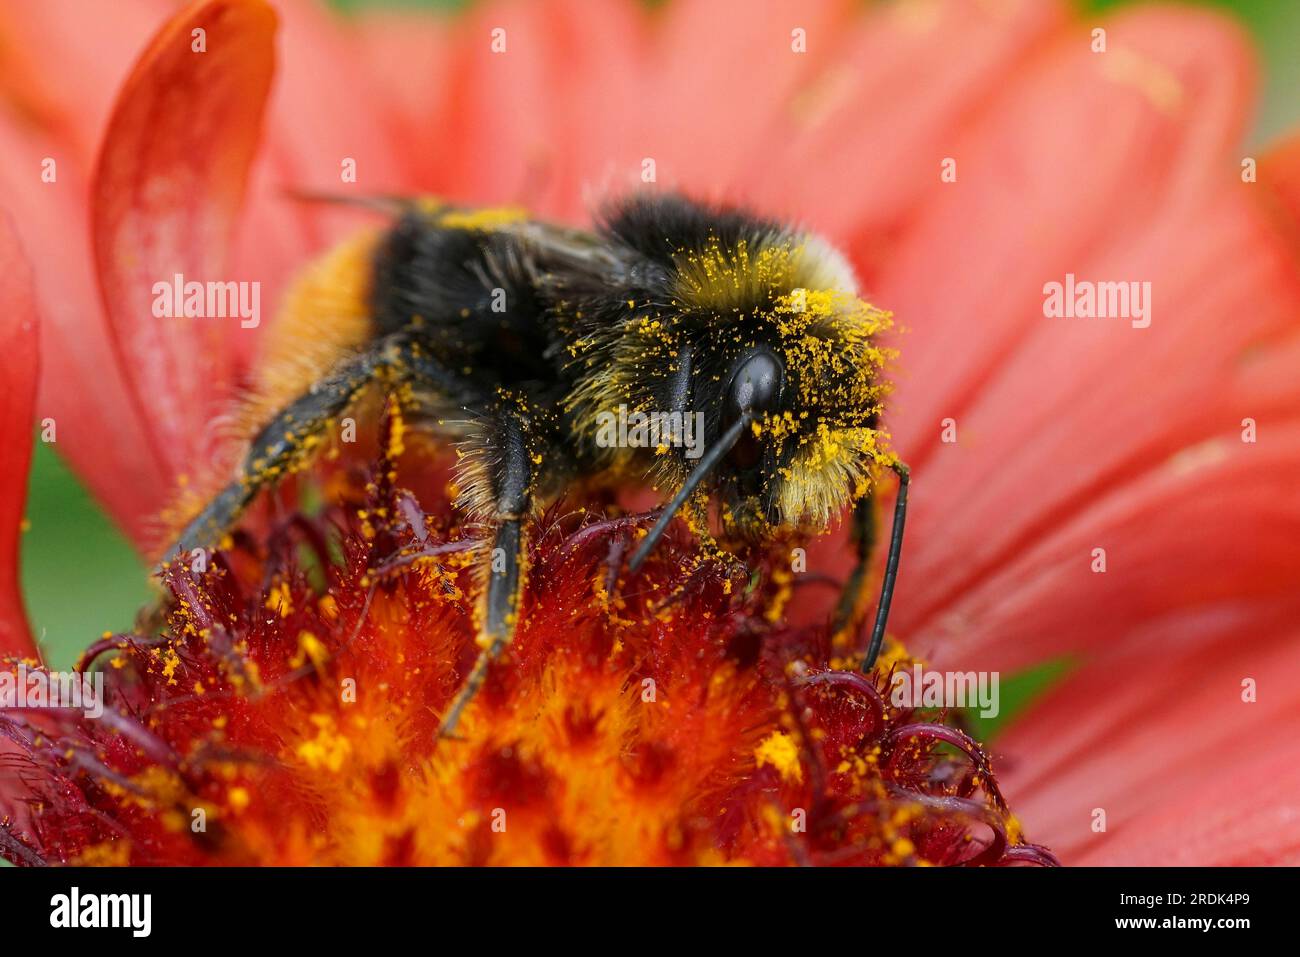 Natural closeup on a red-tailed bumblebee, Bombus lapidarius with yellow pollen on a bright red Gaillardia flower Stock Photo